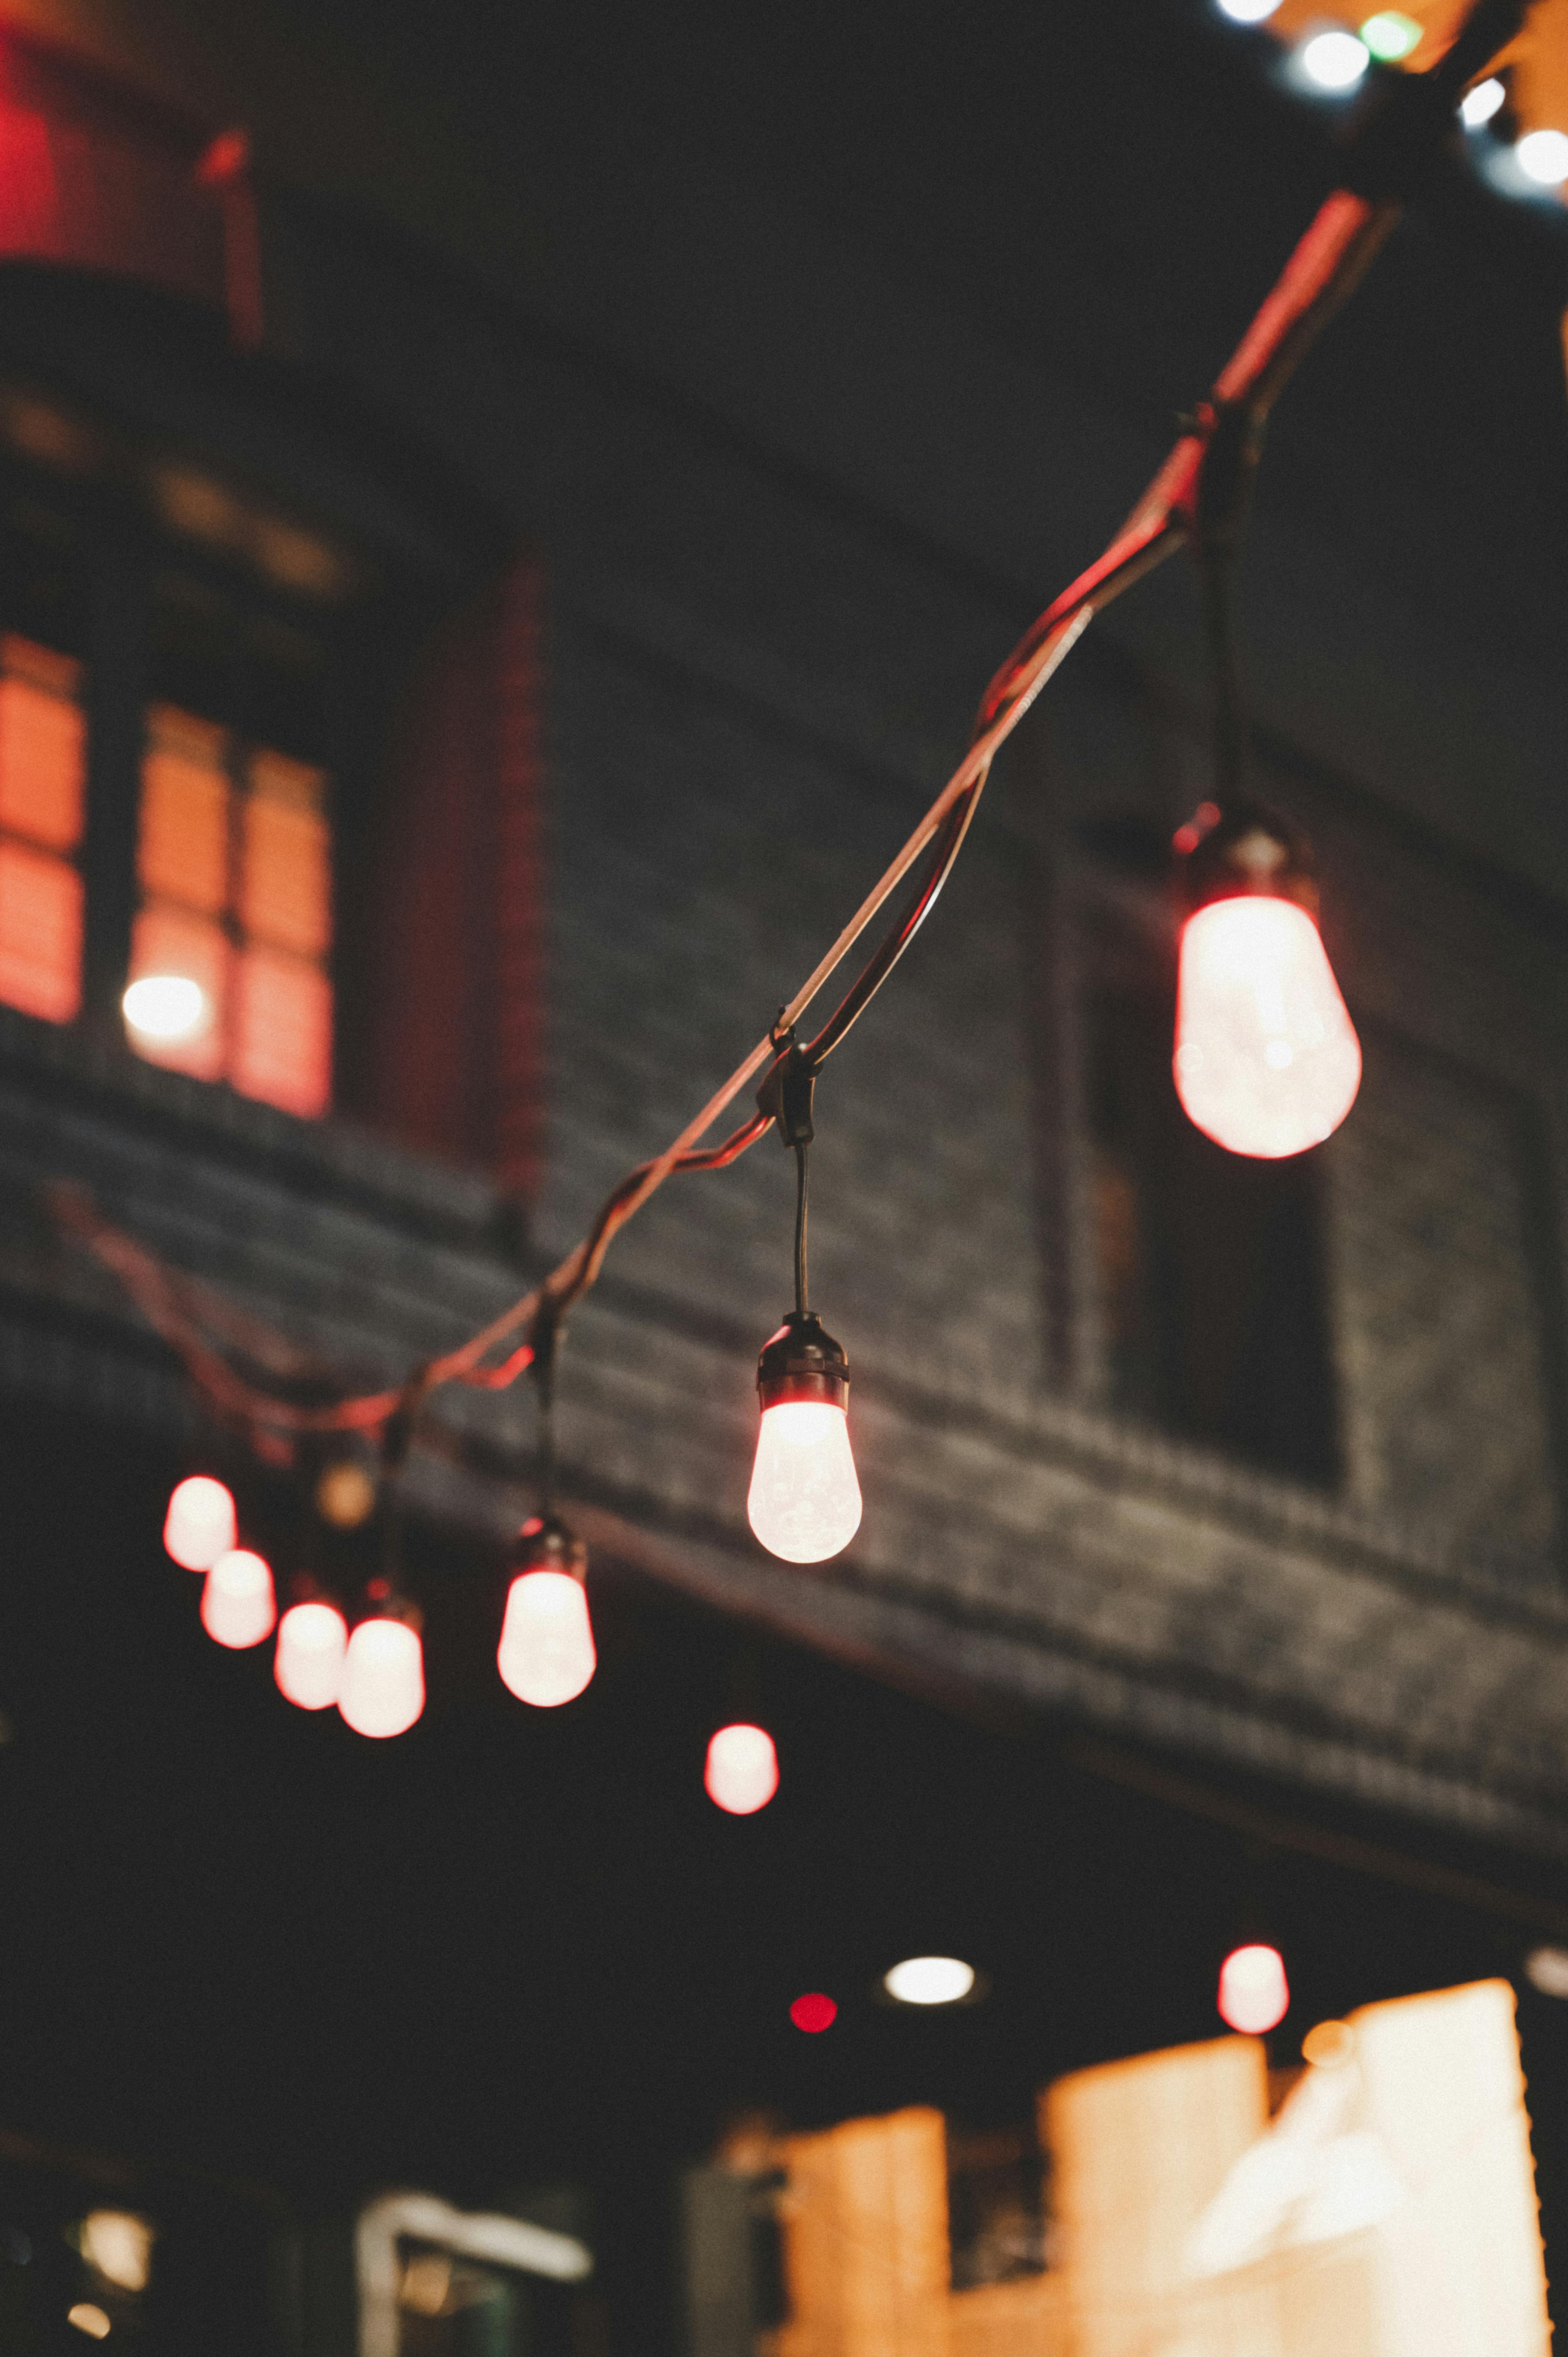 Selective Focus Photography of String Lights · Free Stock Photo